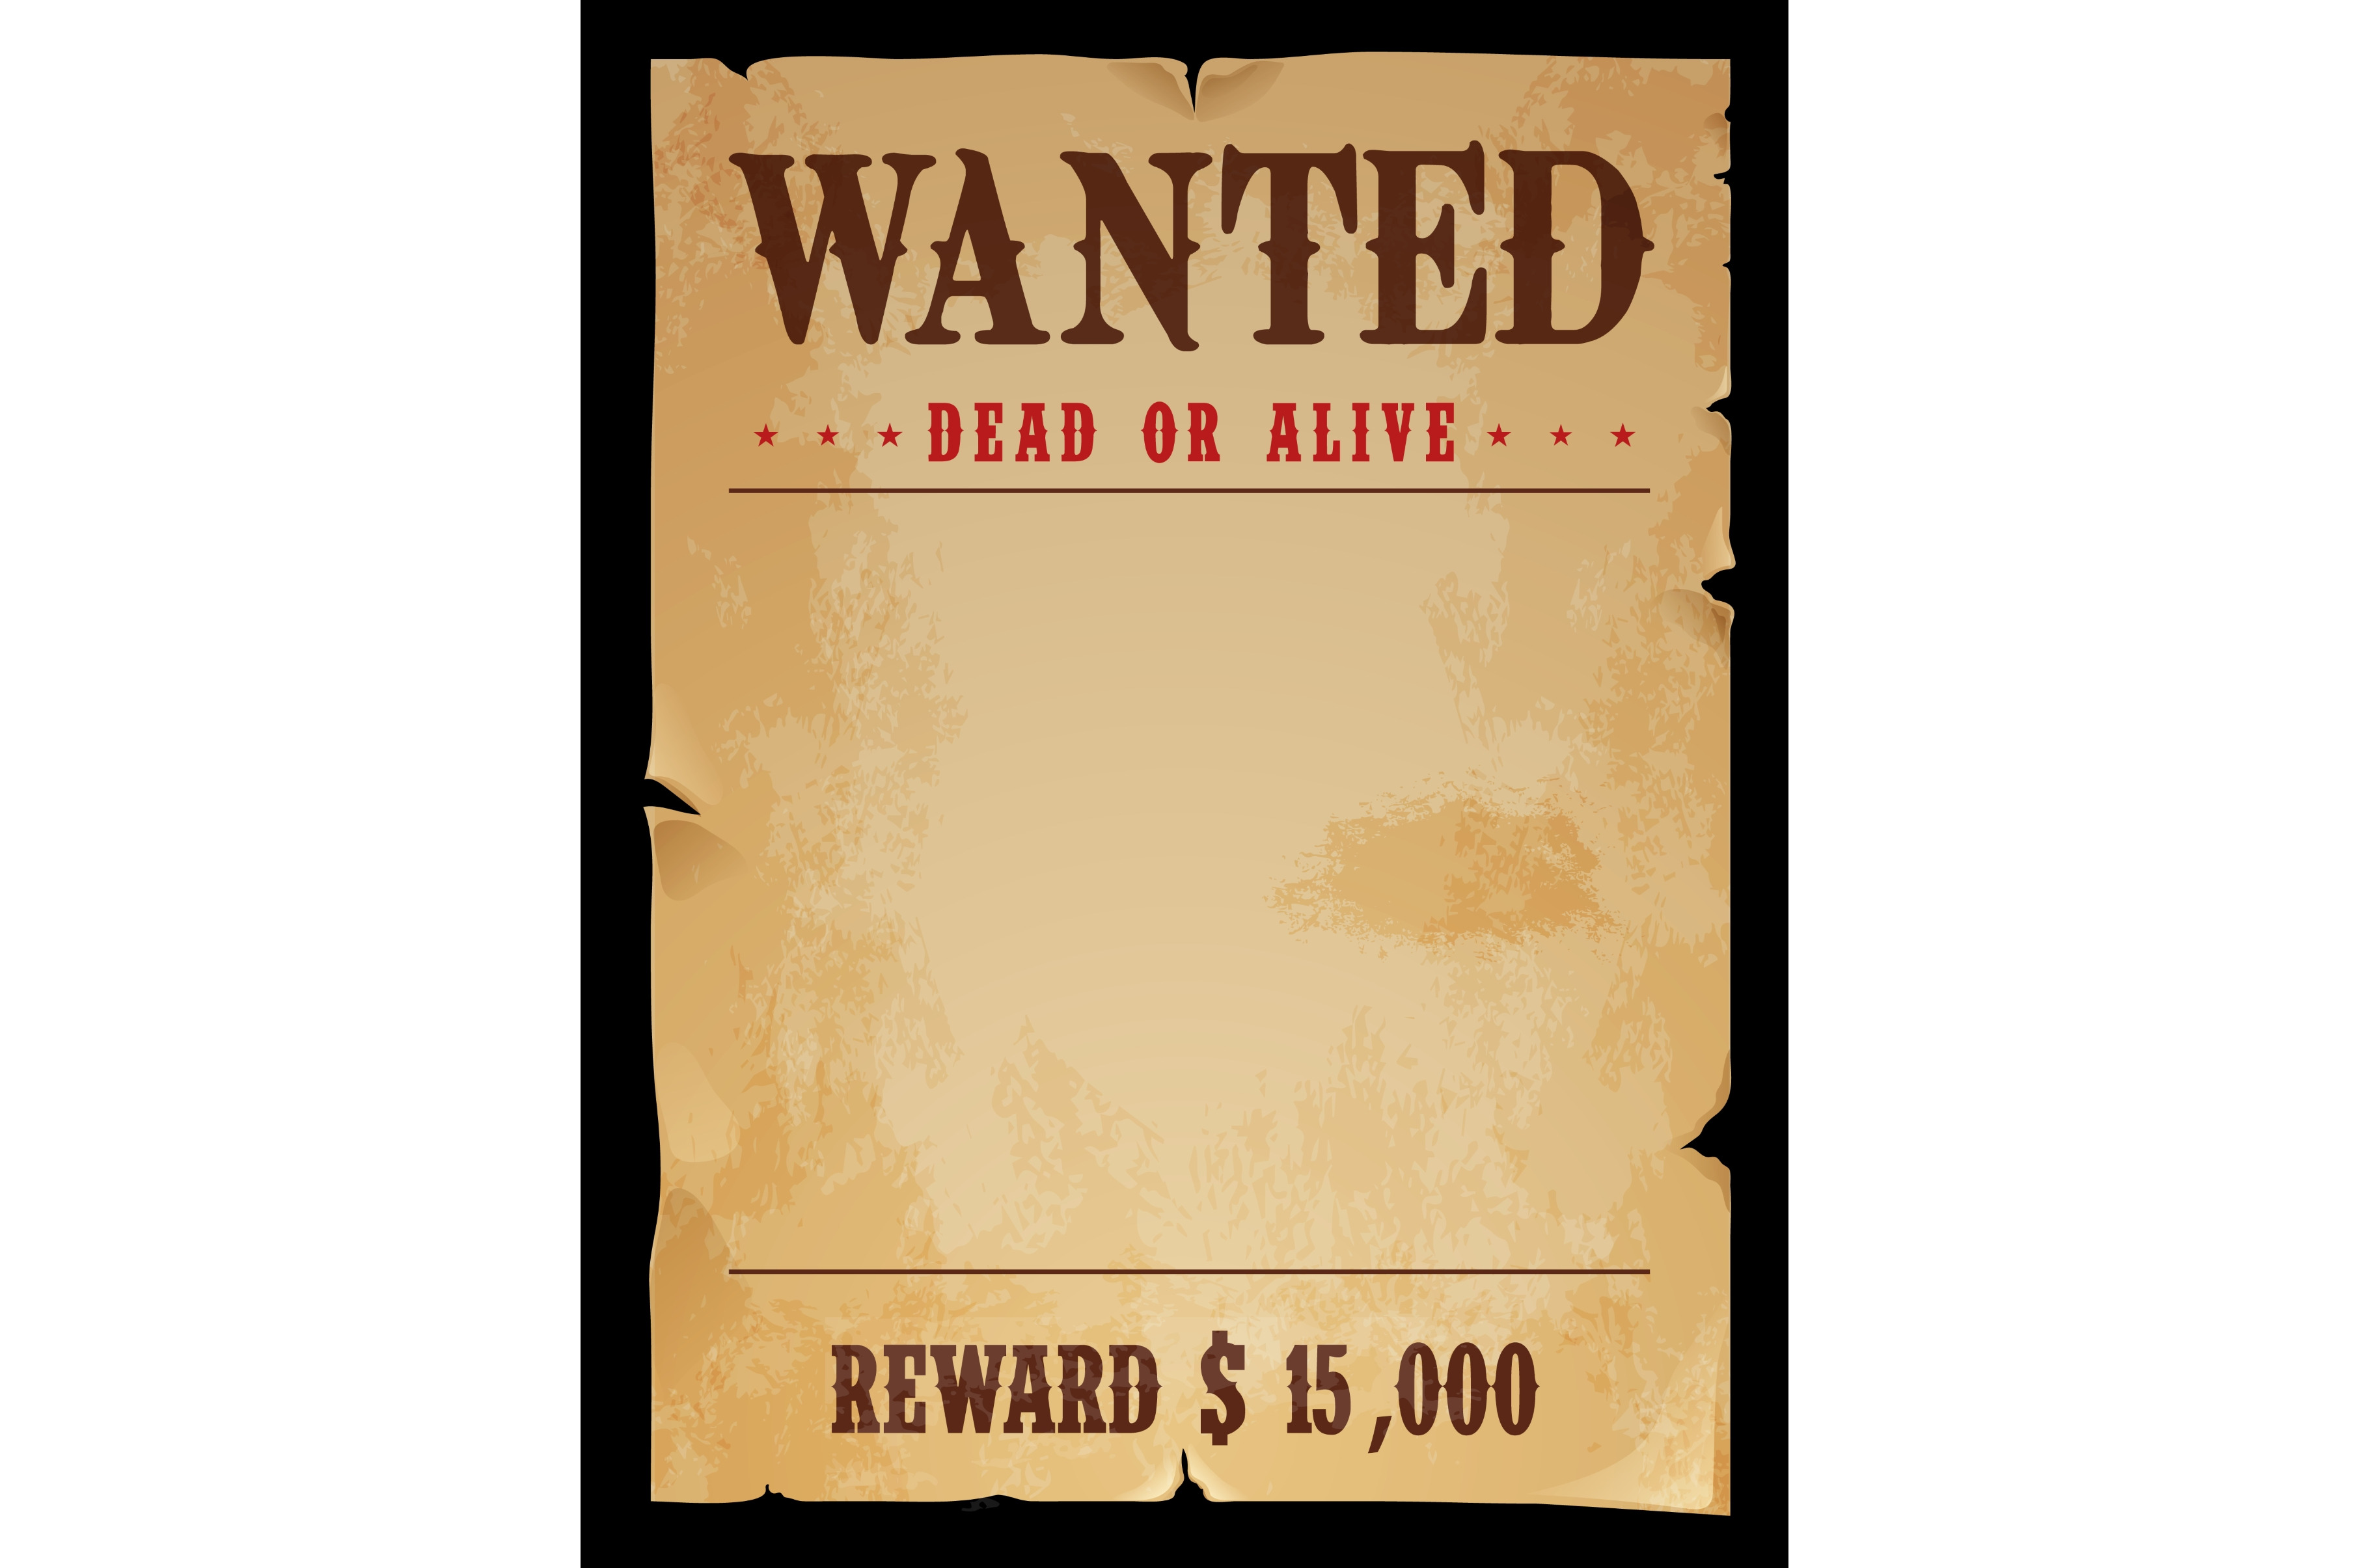 Western wanted banner | Texture Illustrations ~ Creative Market